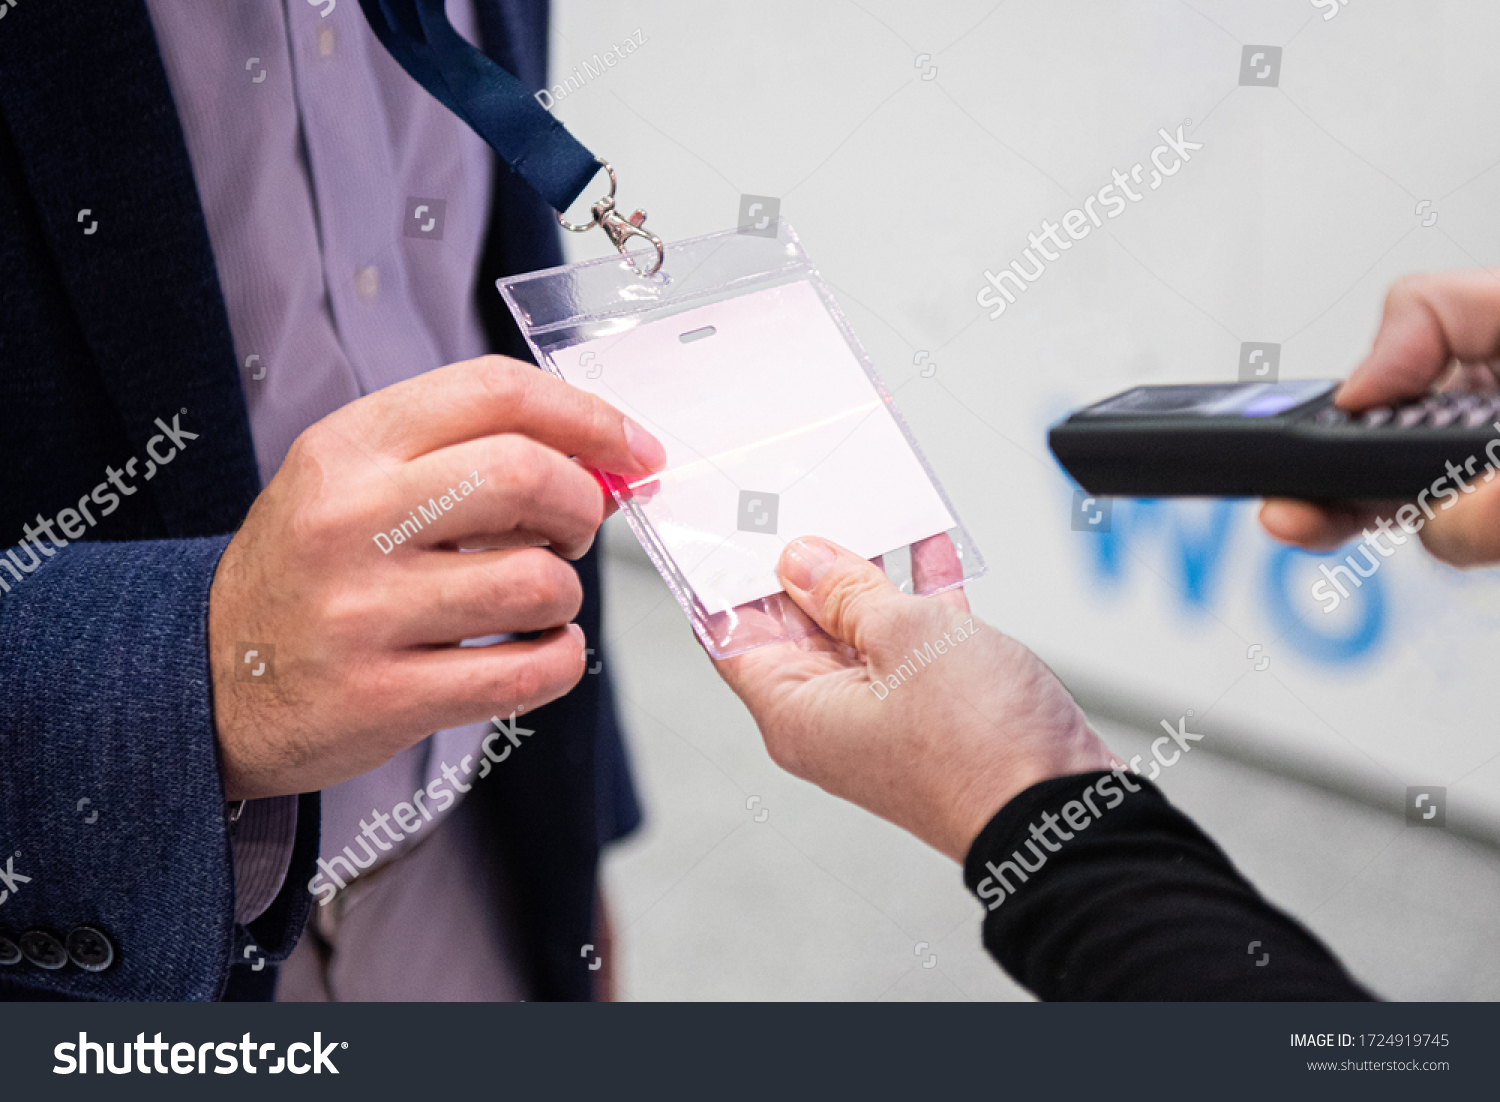 Scanning visitor pass to enter an event or conference #1724919745